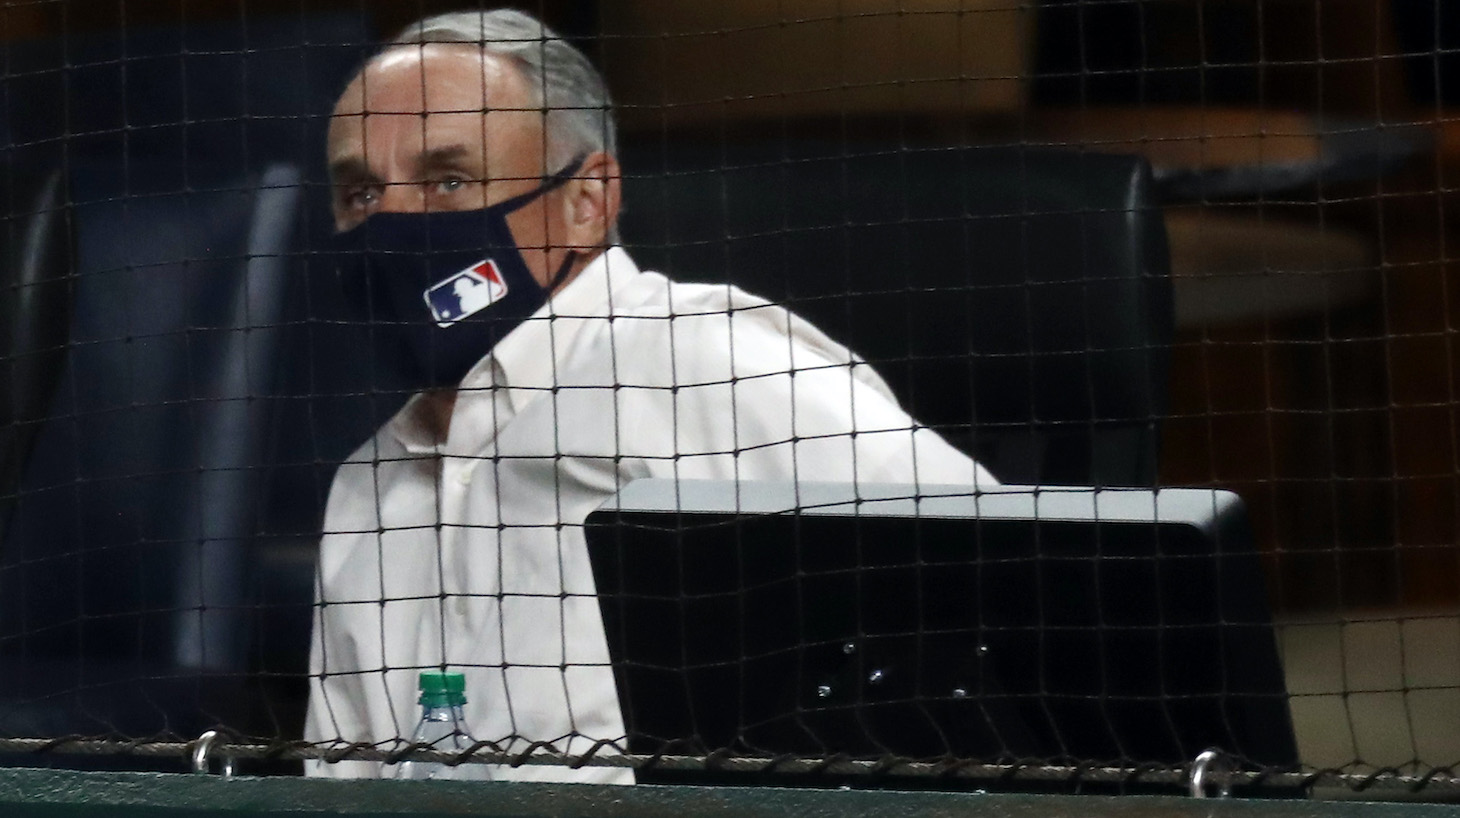 ARLINGTON, TEXAS - OCTOBER 07: Commissioner of Baseball Rob Manfred attends Game Two of the National League Division Series between the San Diego Padres and the Los Angeles Dodgers at Globe Life Field on October 07, 2020 in Arlington, Texas. (Photo by Ronald Martinez/Getty Images)